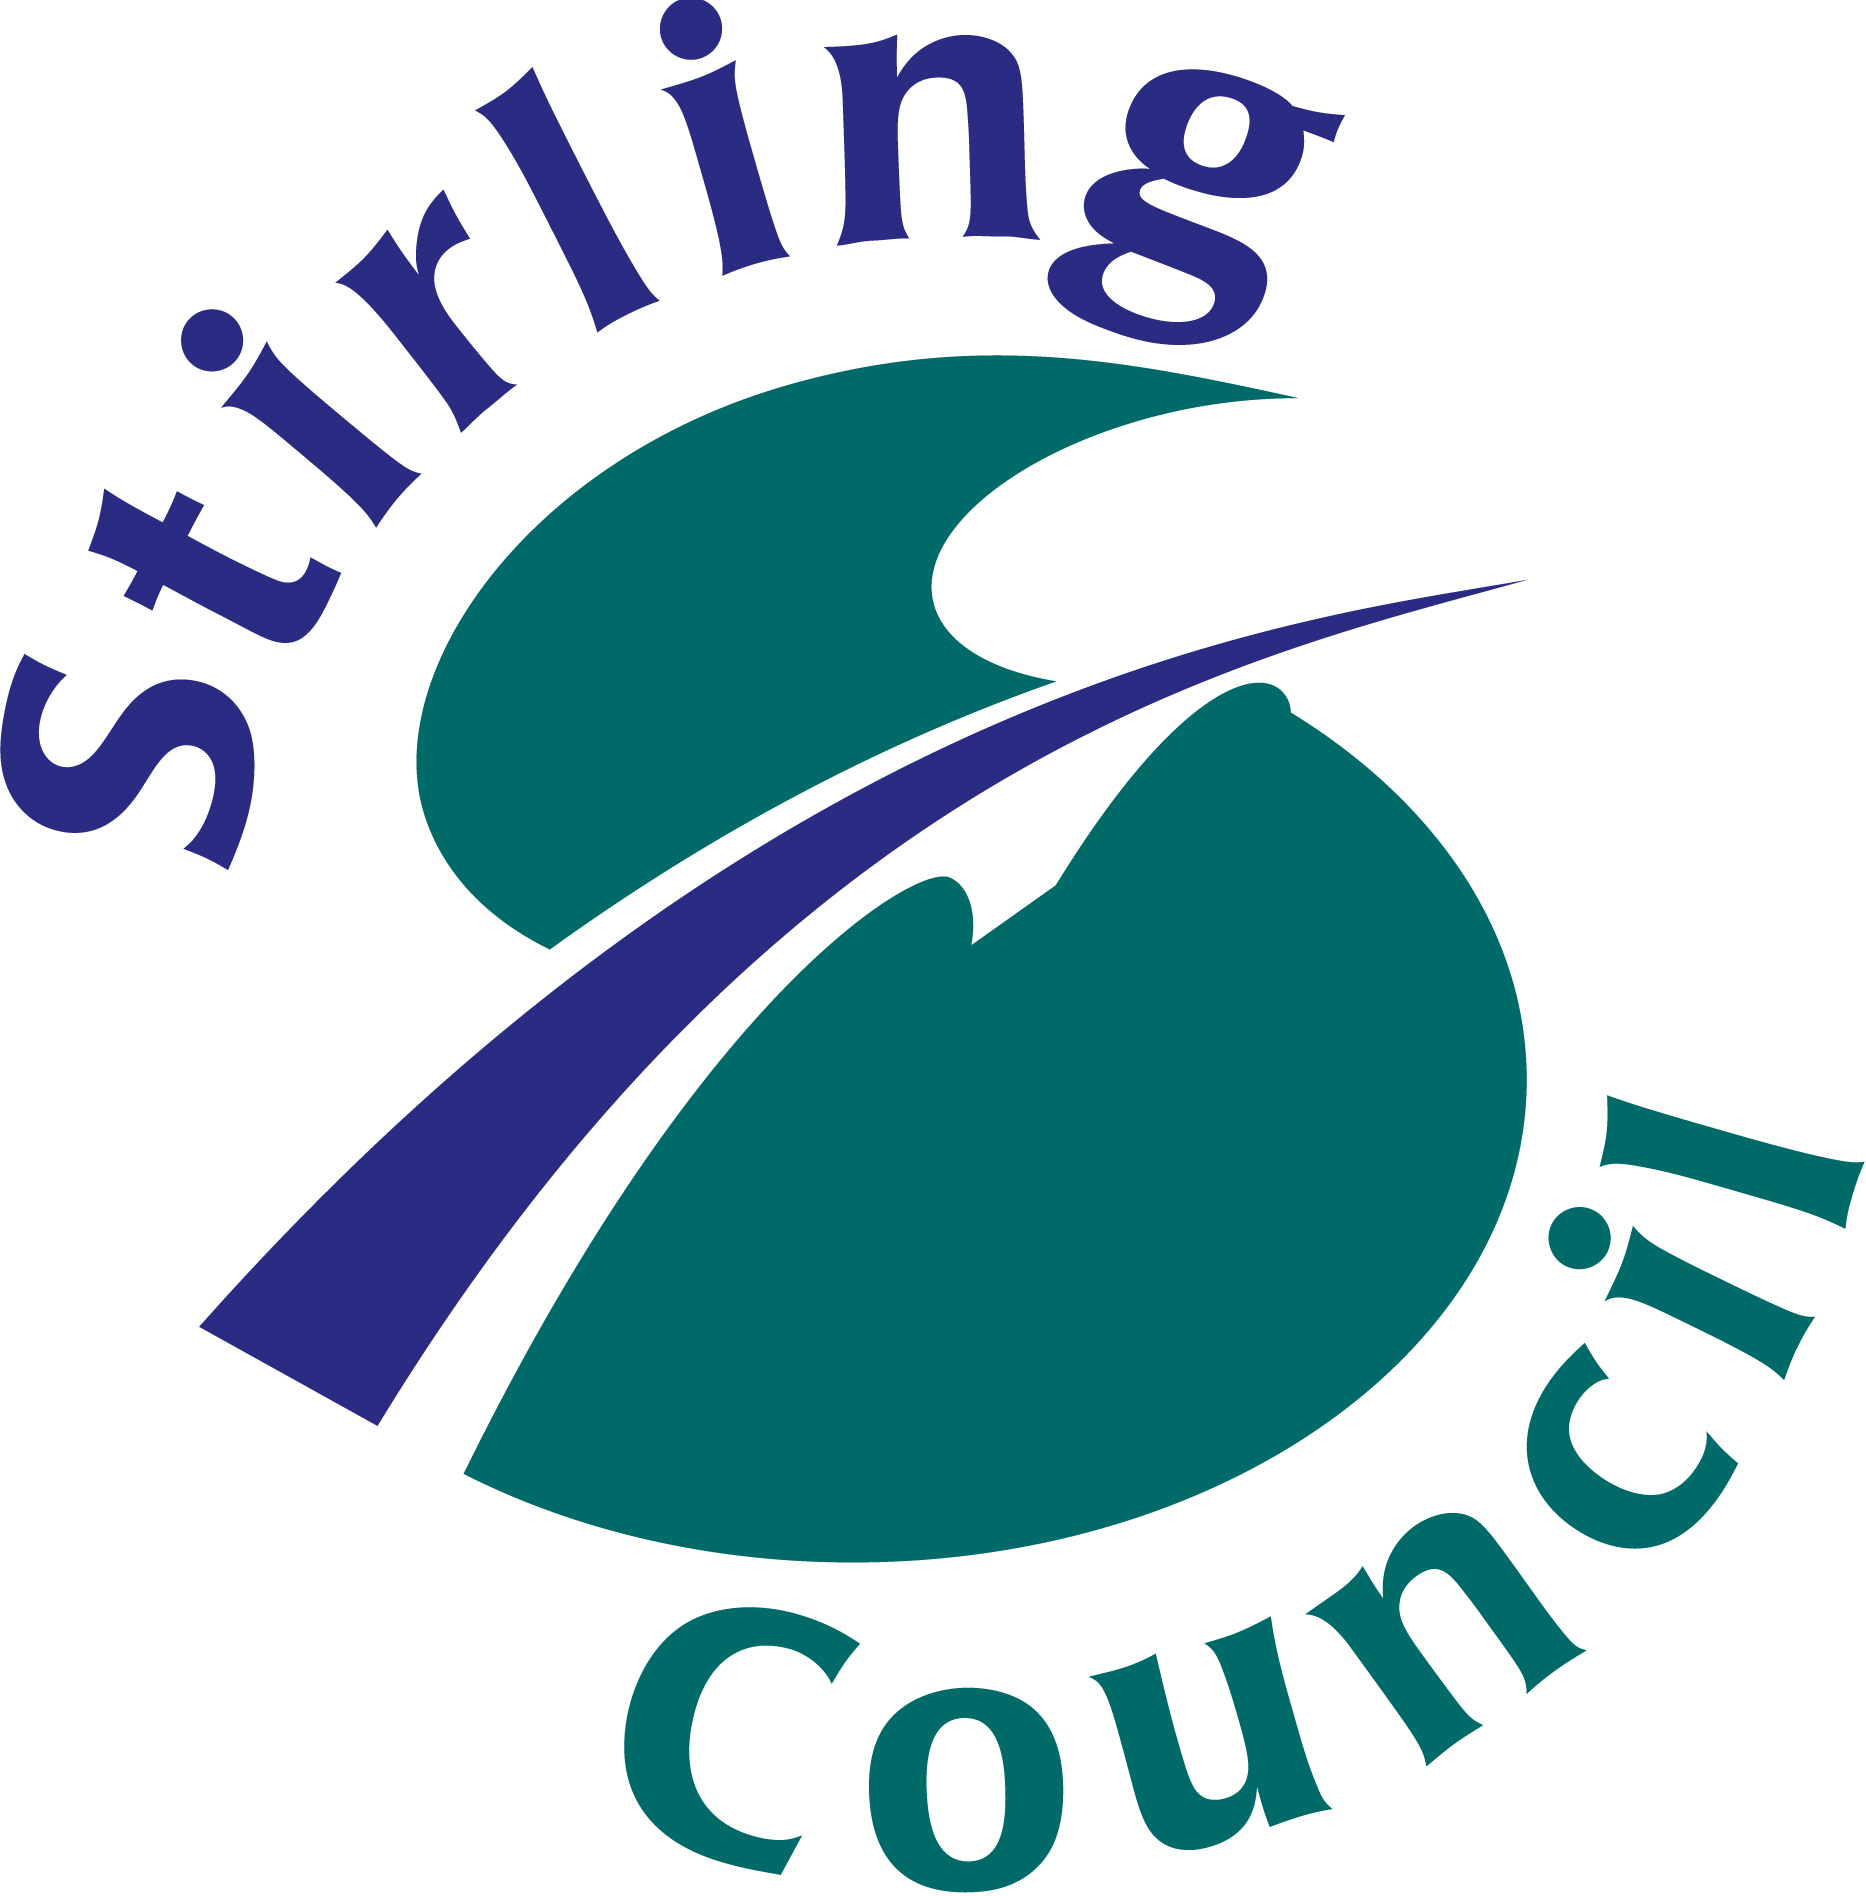 Stirling Council seeks residents’ views as it faces biggest ever financial challenge